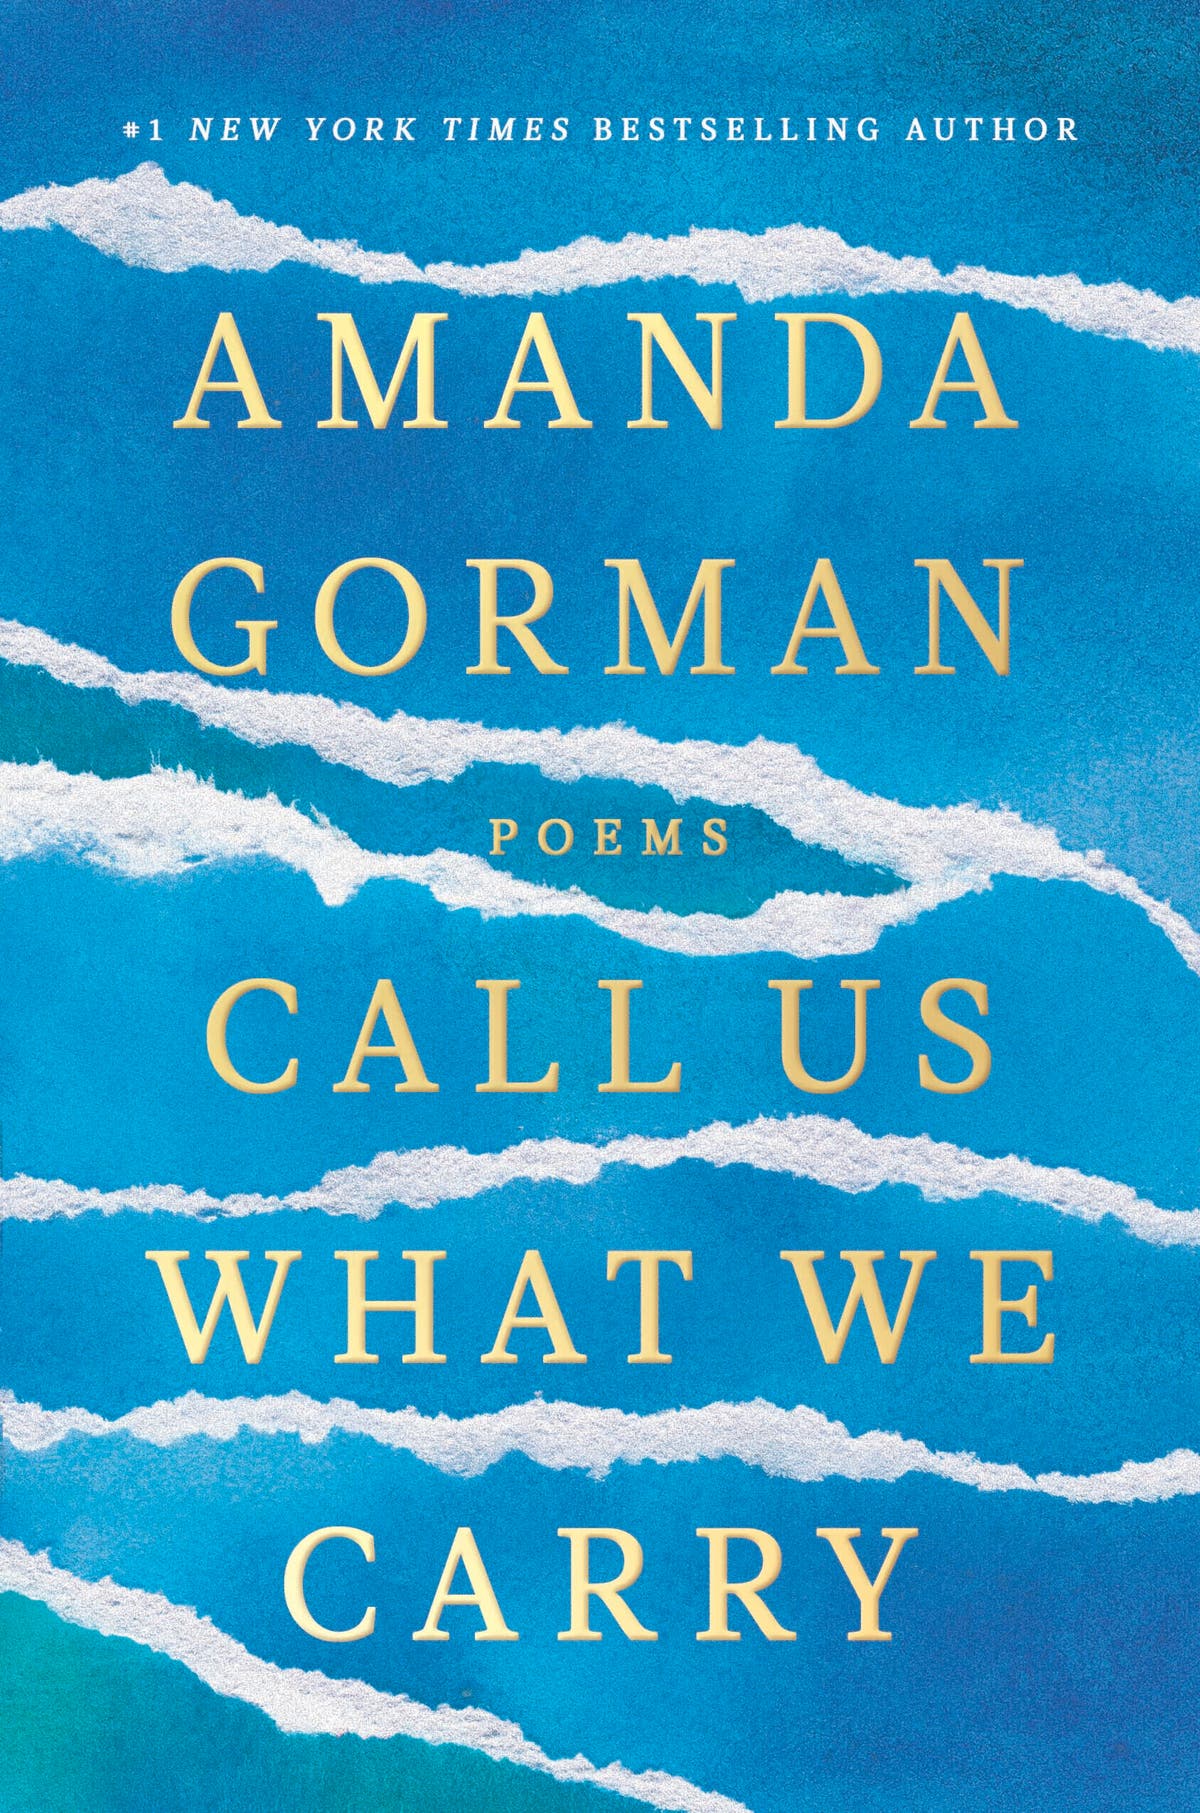 Review: Amanda Gorman offers the inventive 'Lexicon of Hope'